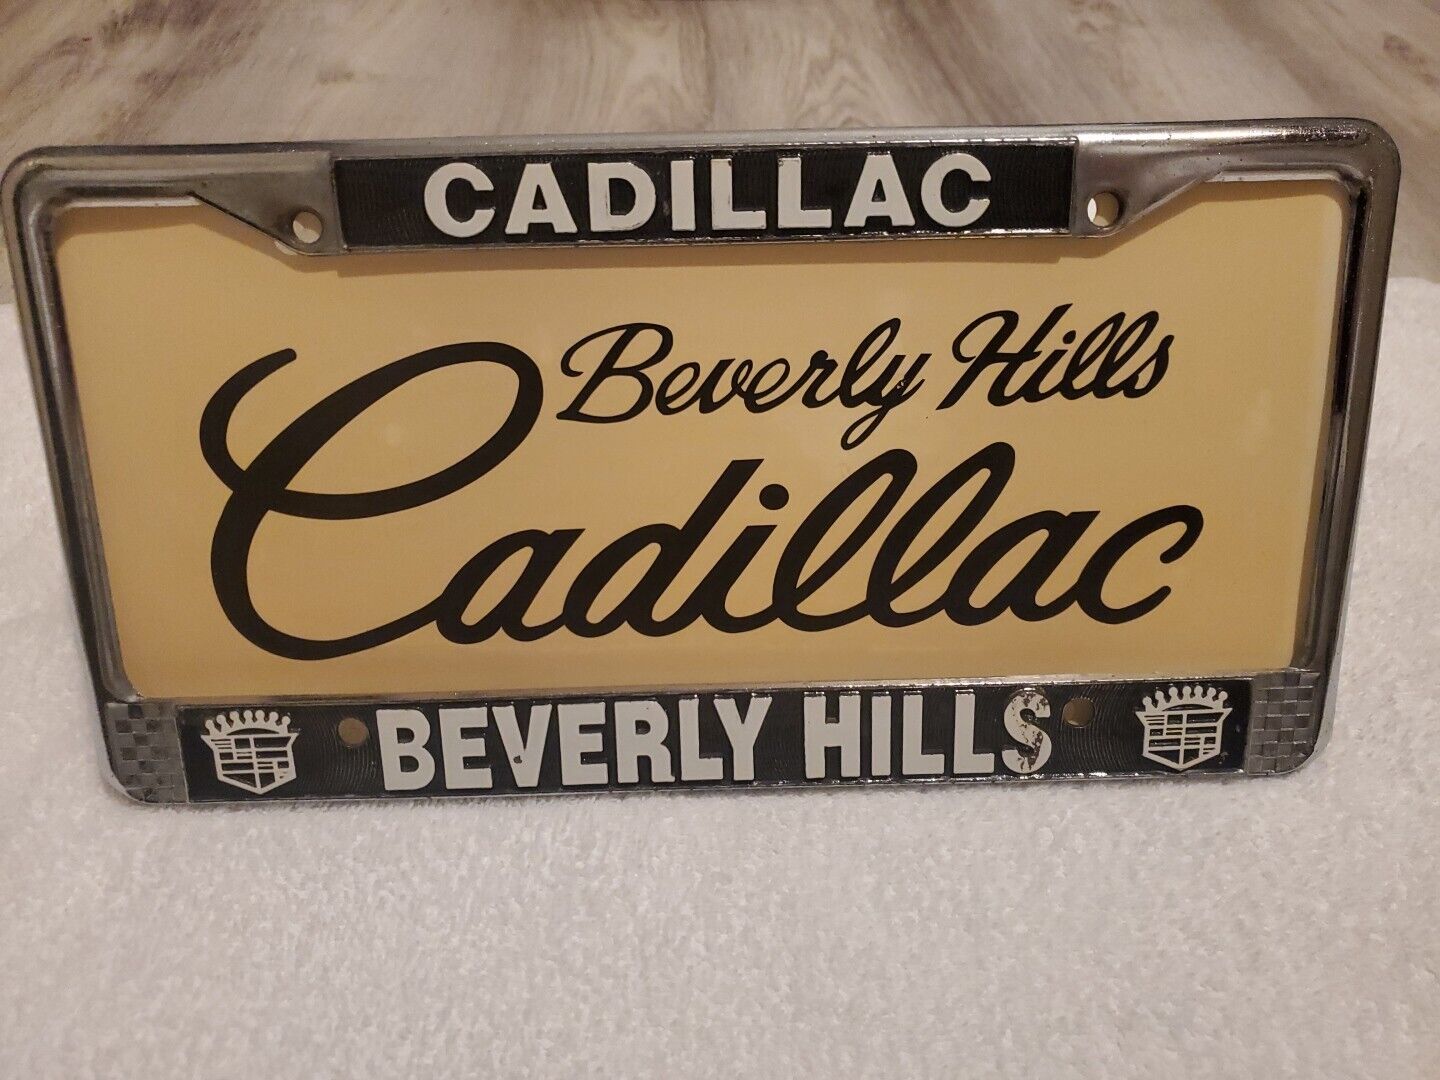 Beverly Hills Cadillac Car Dealer License Plate Frame and Insert Very Rare Gem